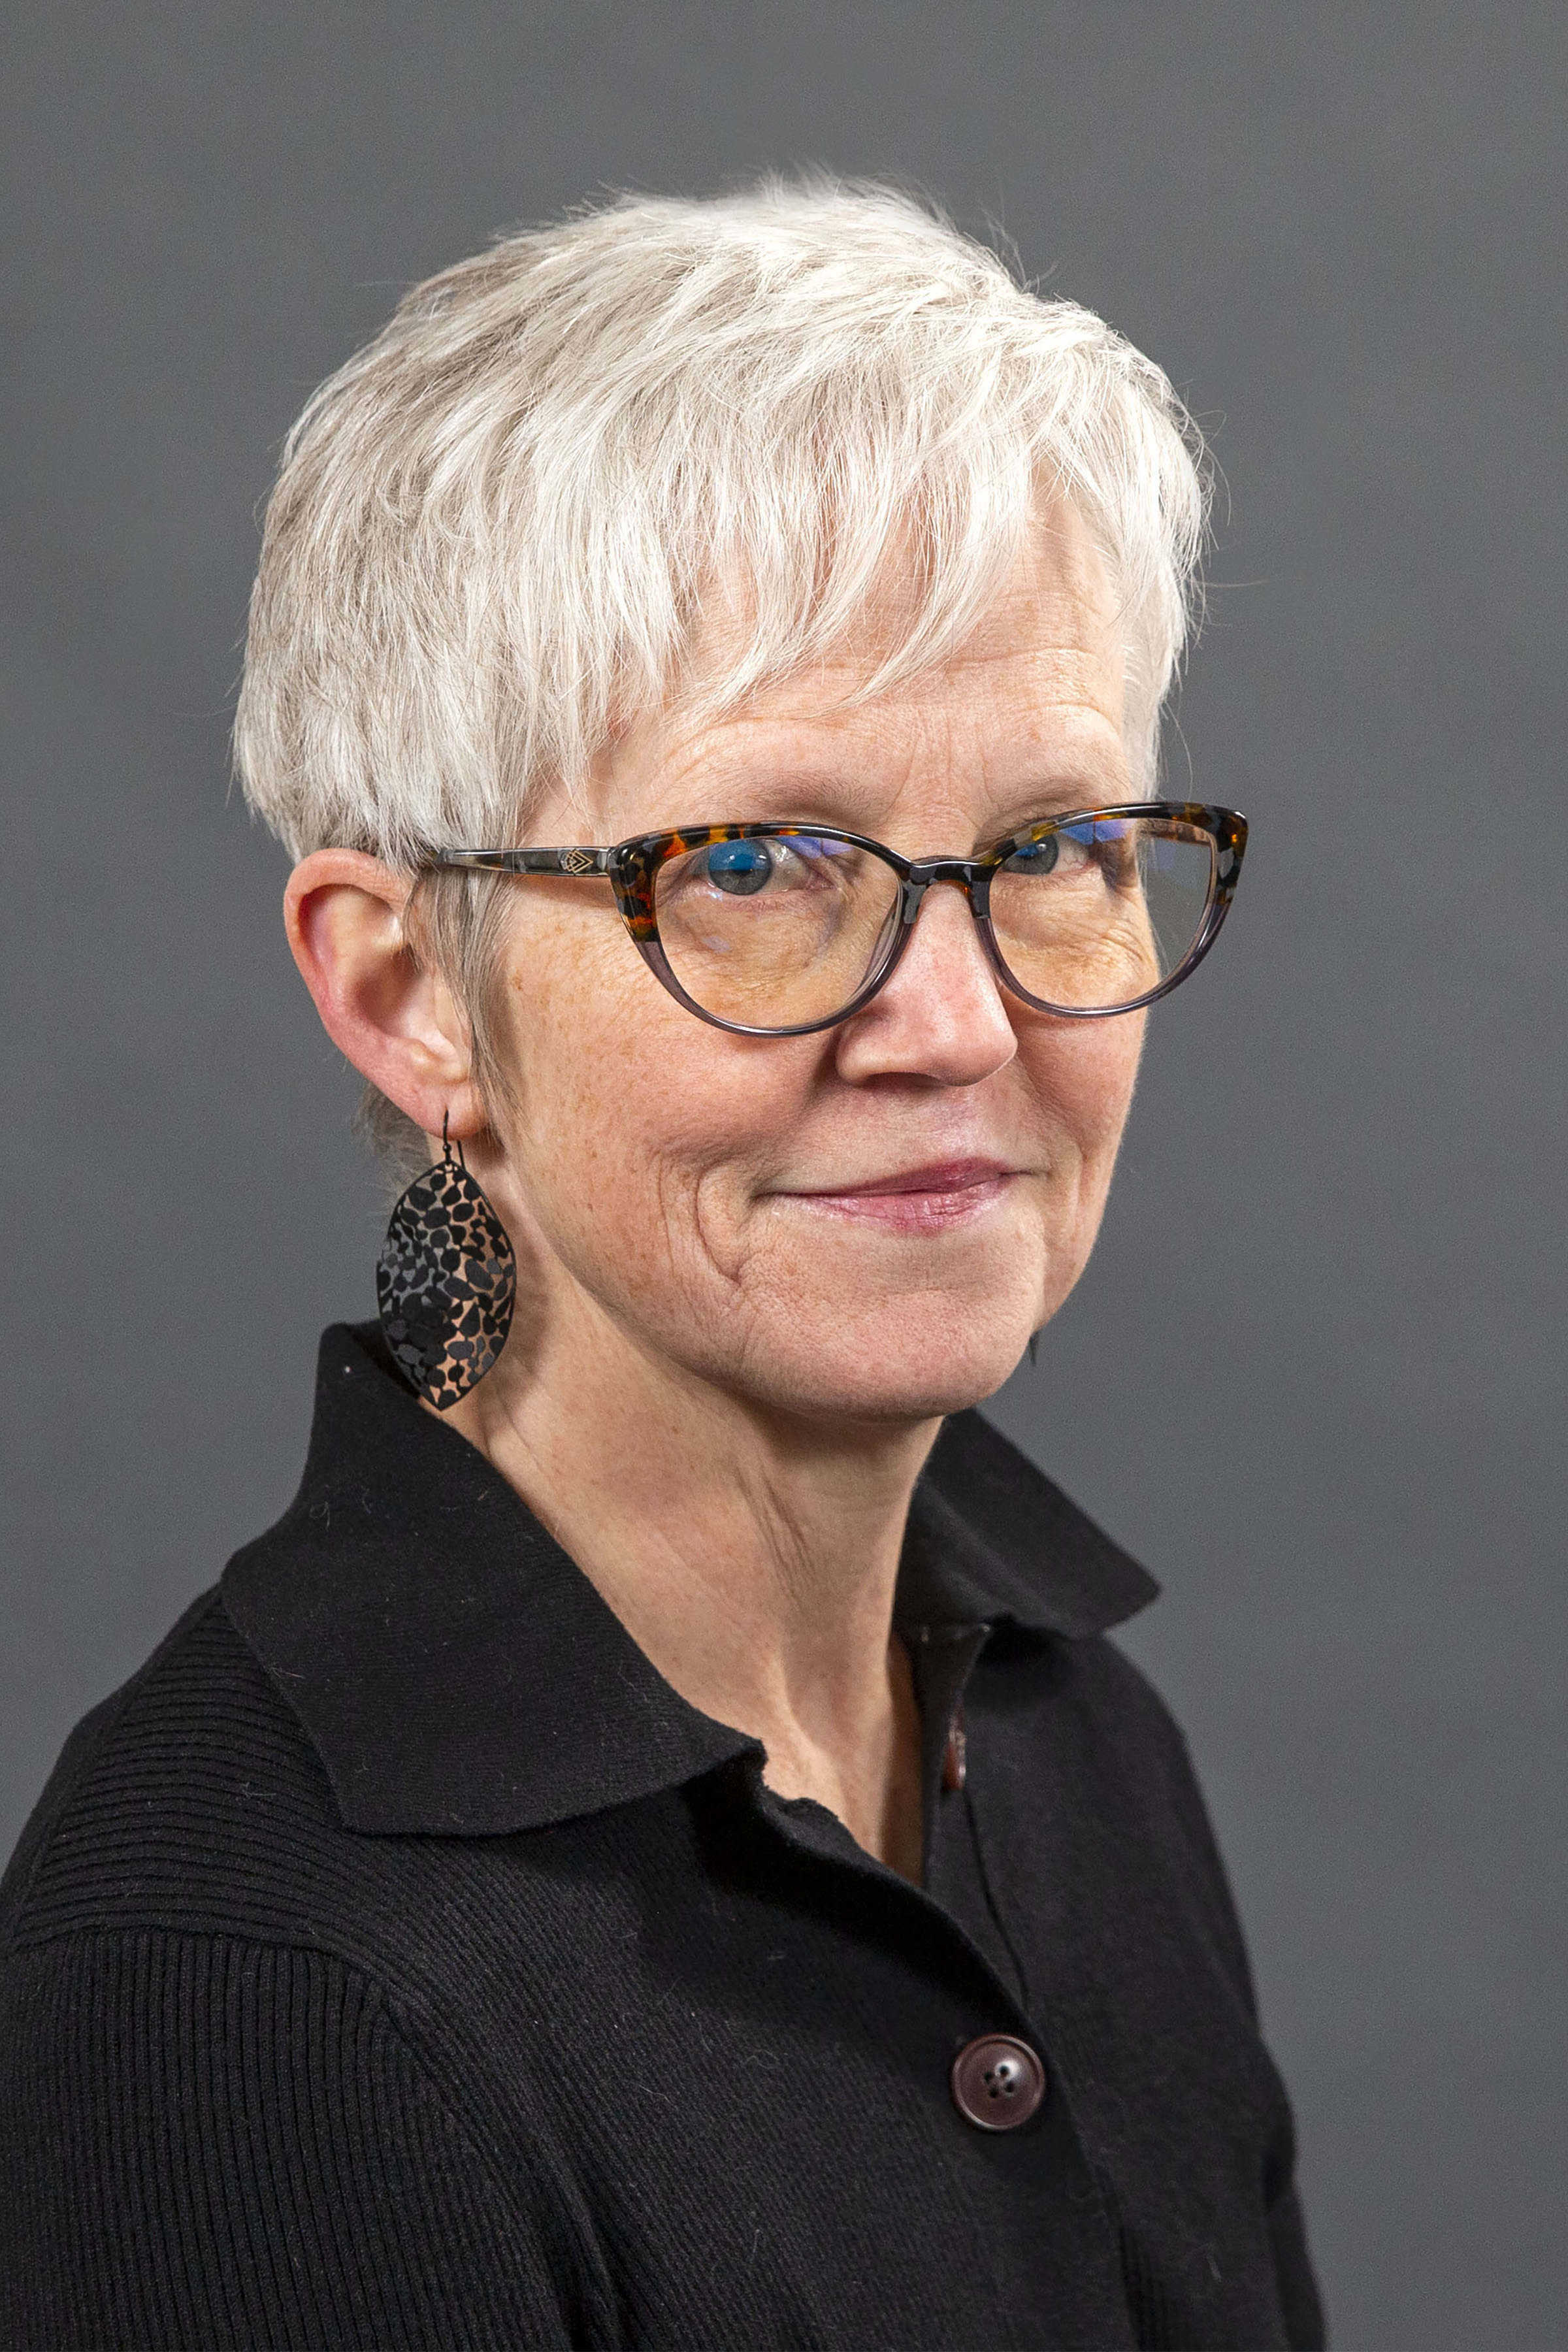 Woman with glasses, black shirt, and grey hair